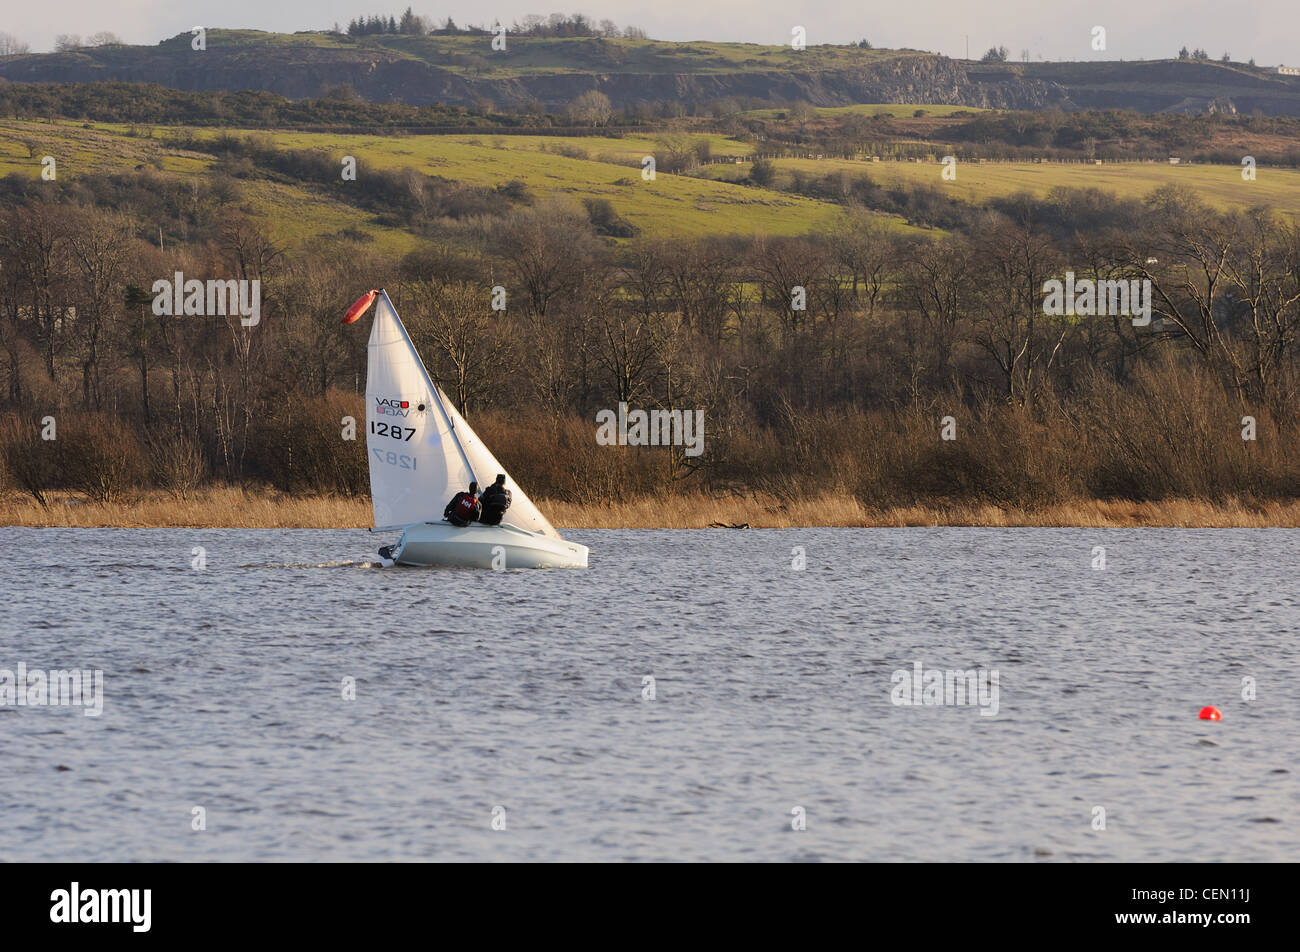 Learning to sail on Castle Semple Loch in some of Scotland's beautiful scenery as a backdrop. Stock Photo